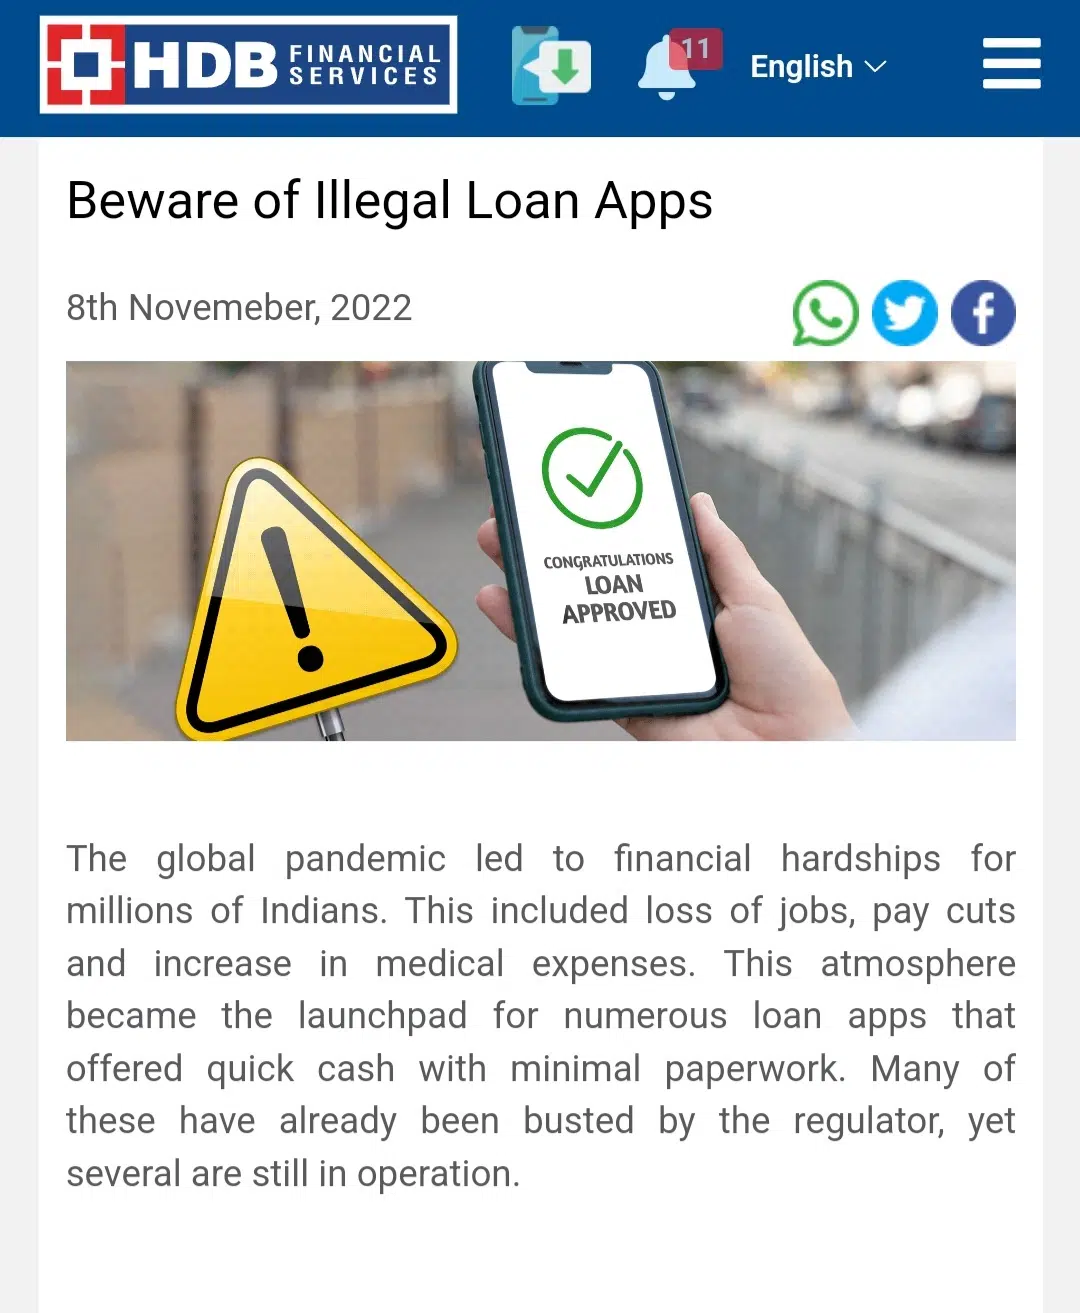 HDFC Bank report on illegal loan apps